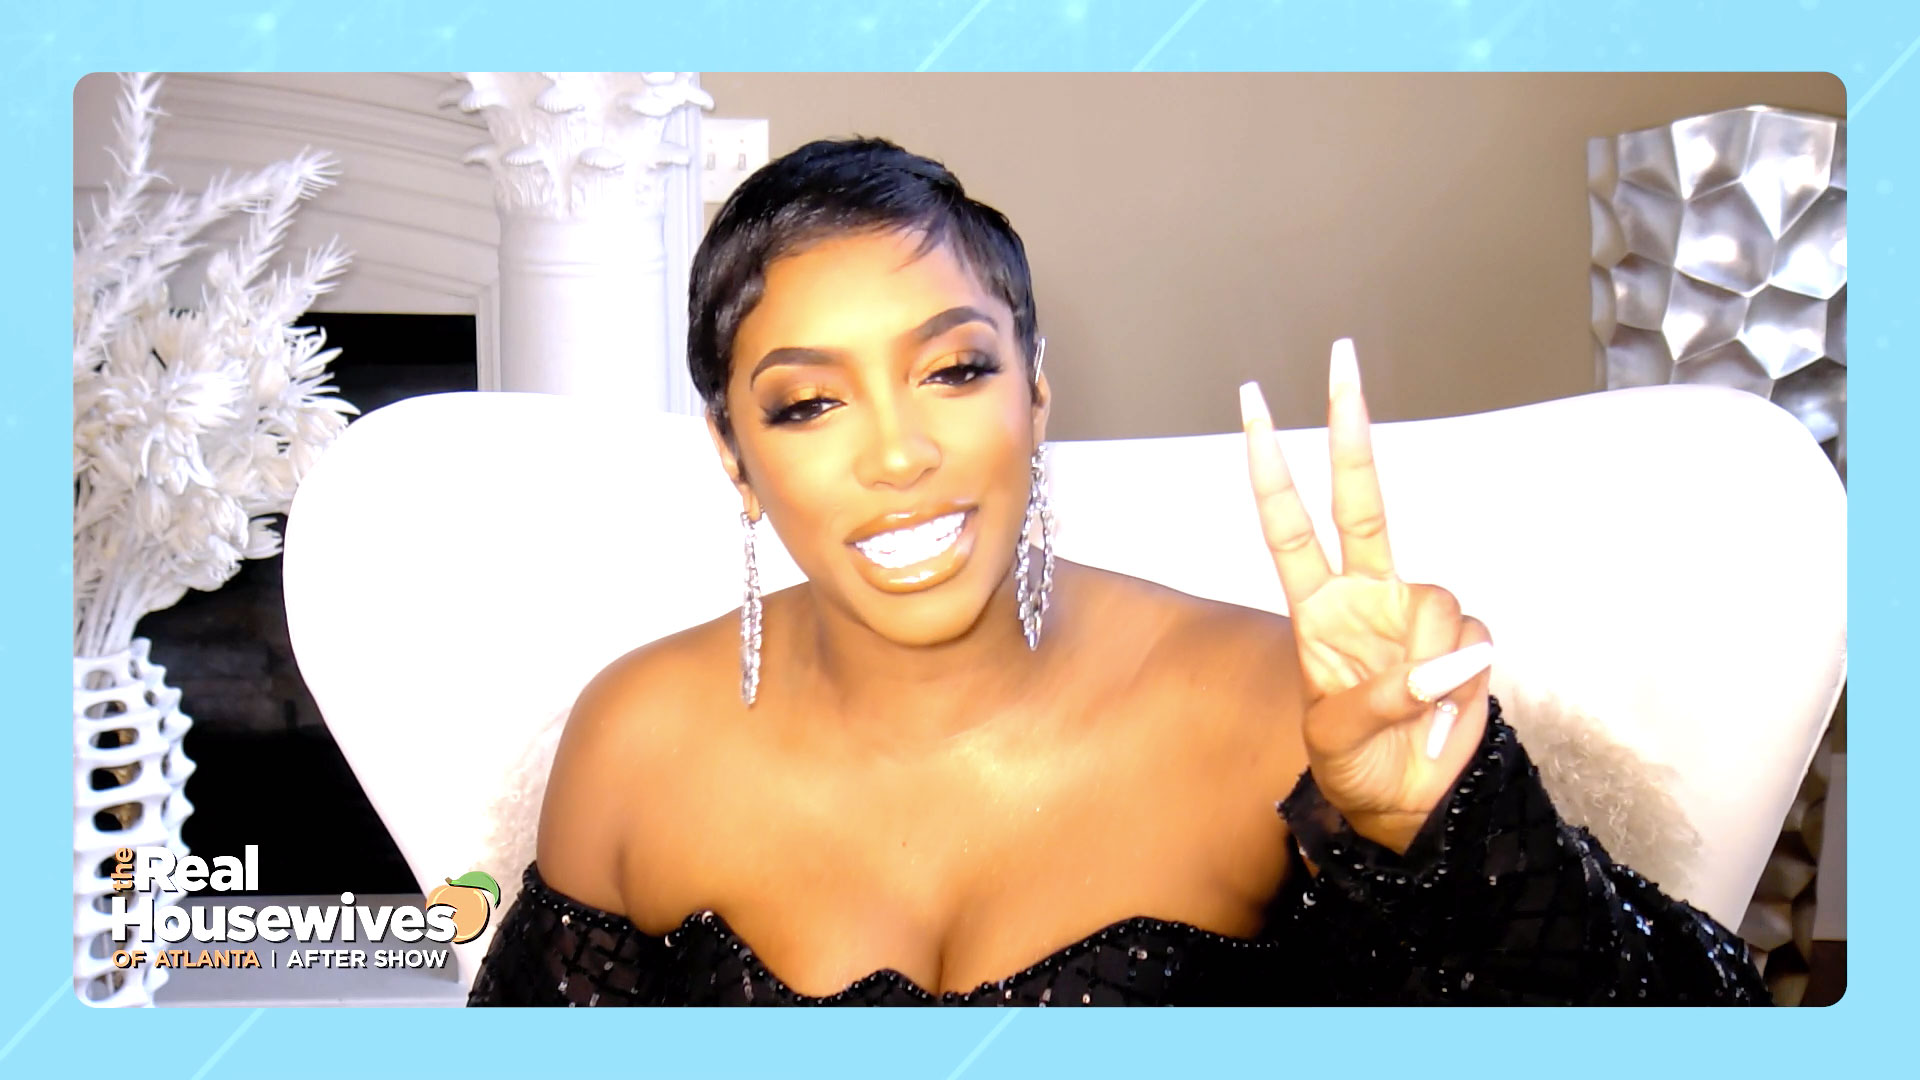 Porsha Williams and the RHOA Ladies Reveal the Shocking and Hilarious Stories Behind Their Alter Egos